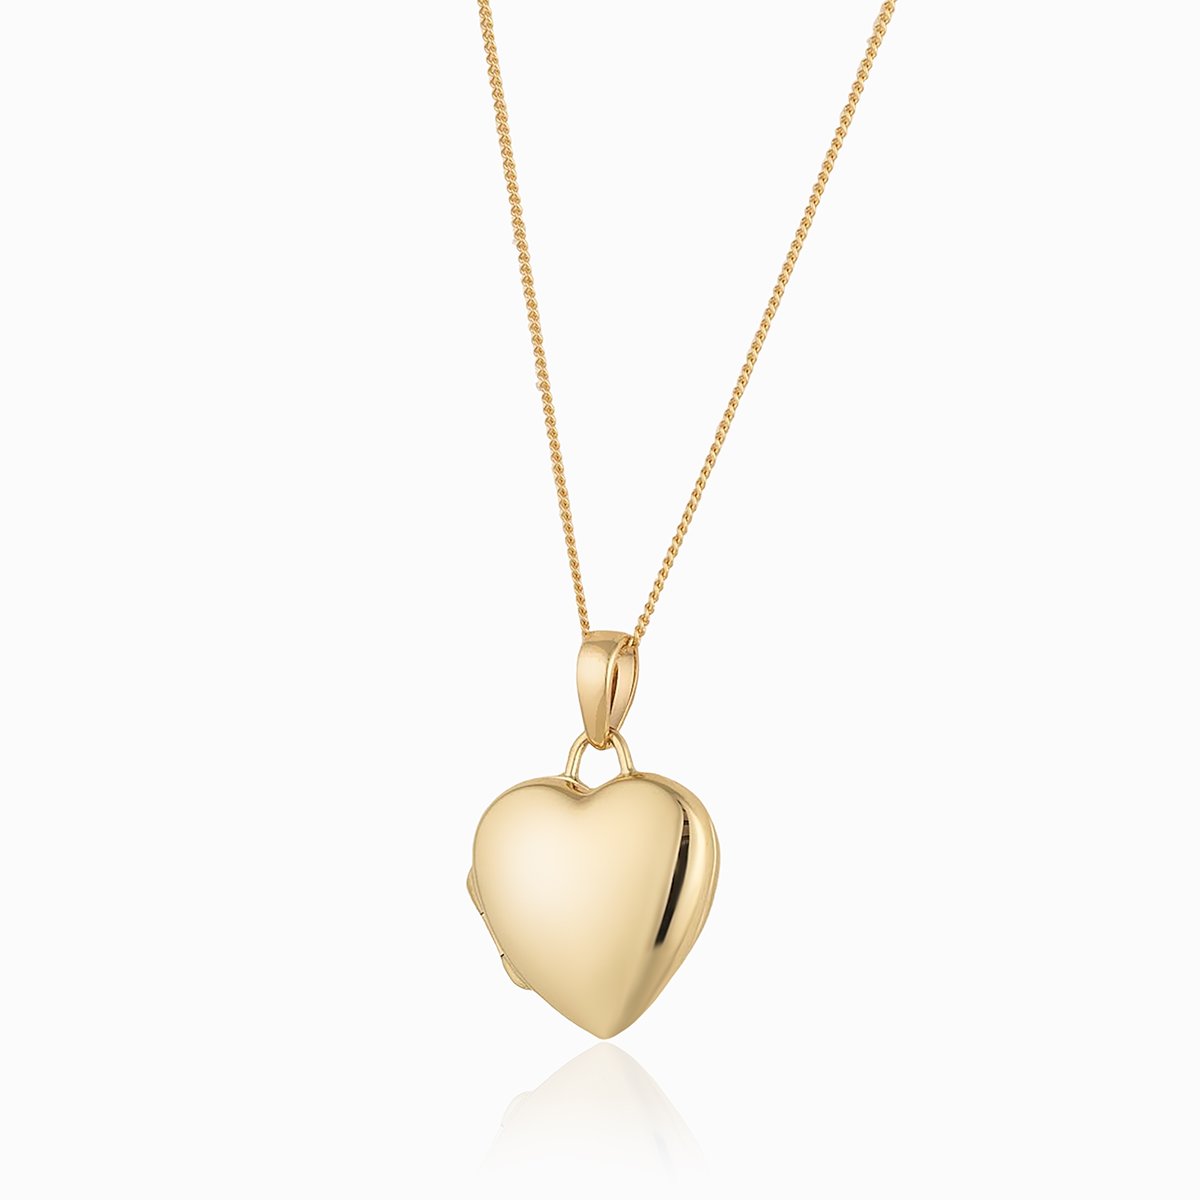 9 ct gold polished heart locket on a 9 ct gold curb chain